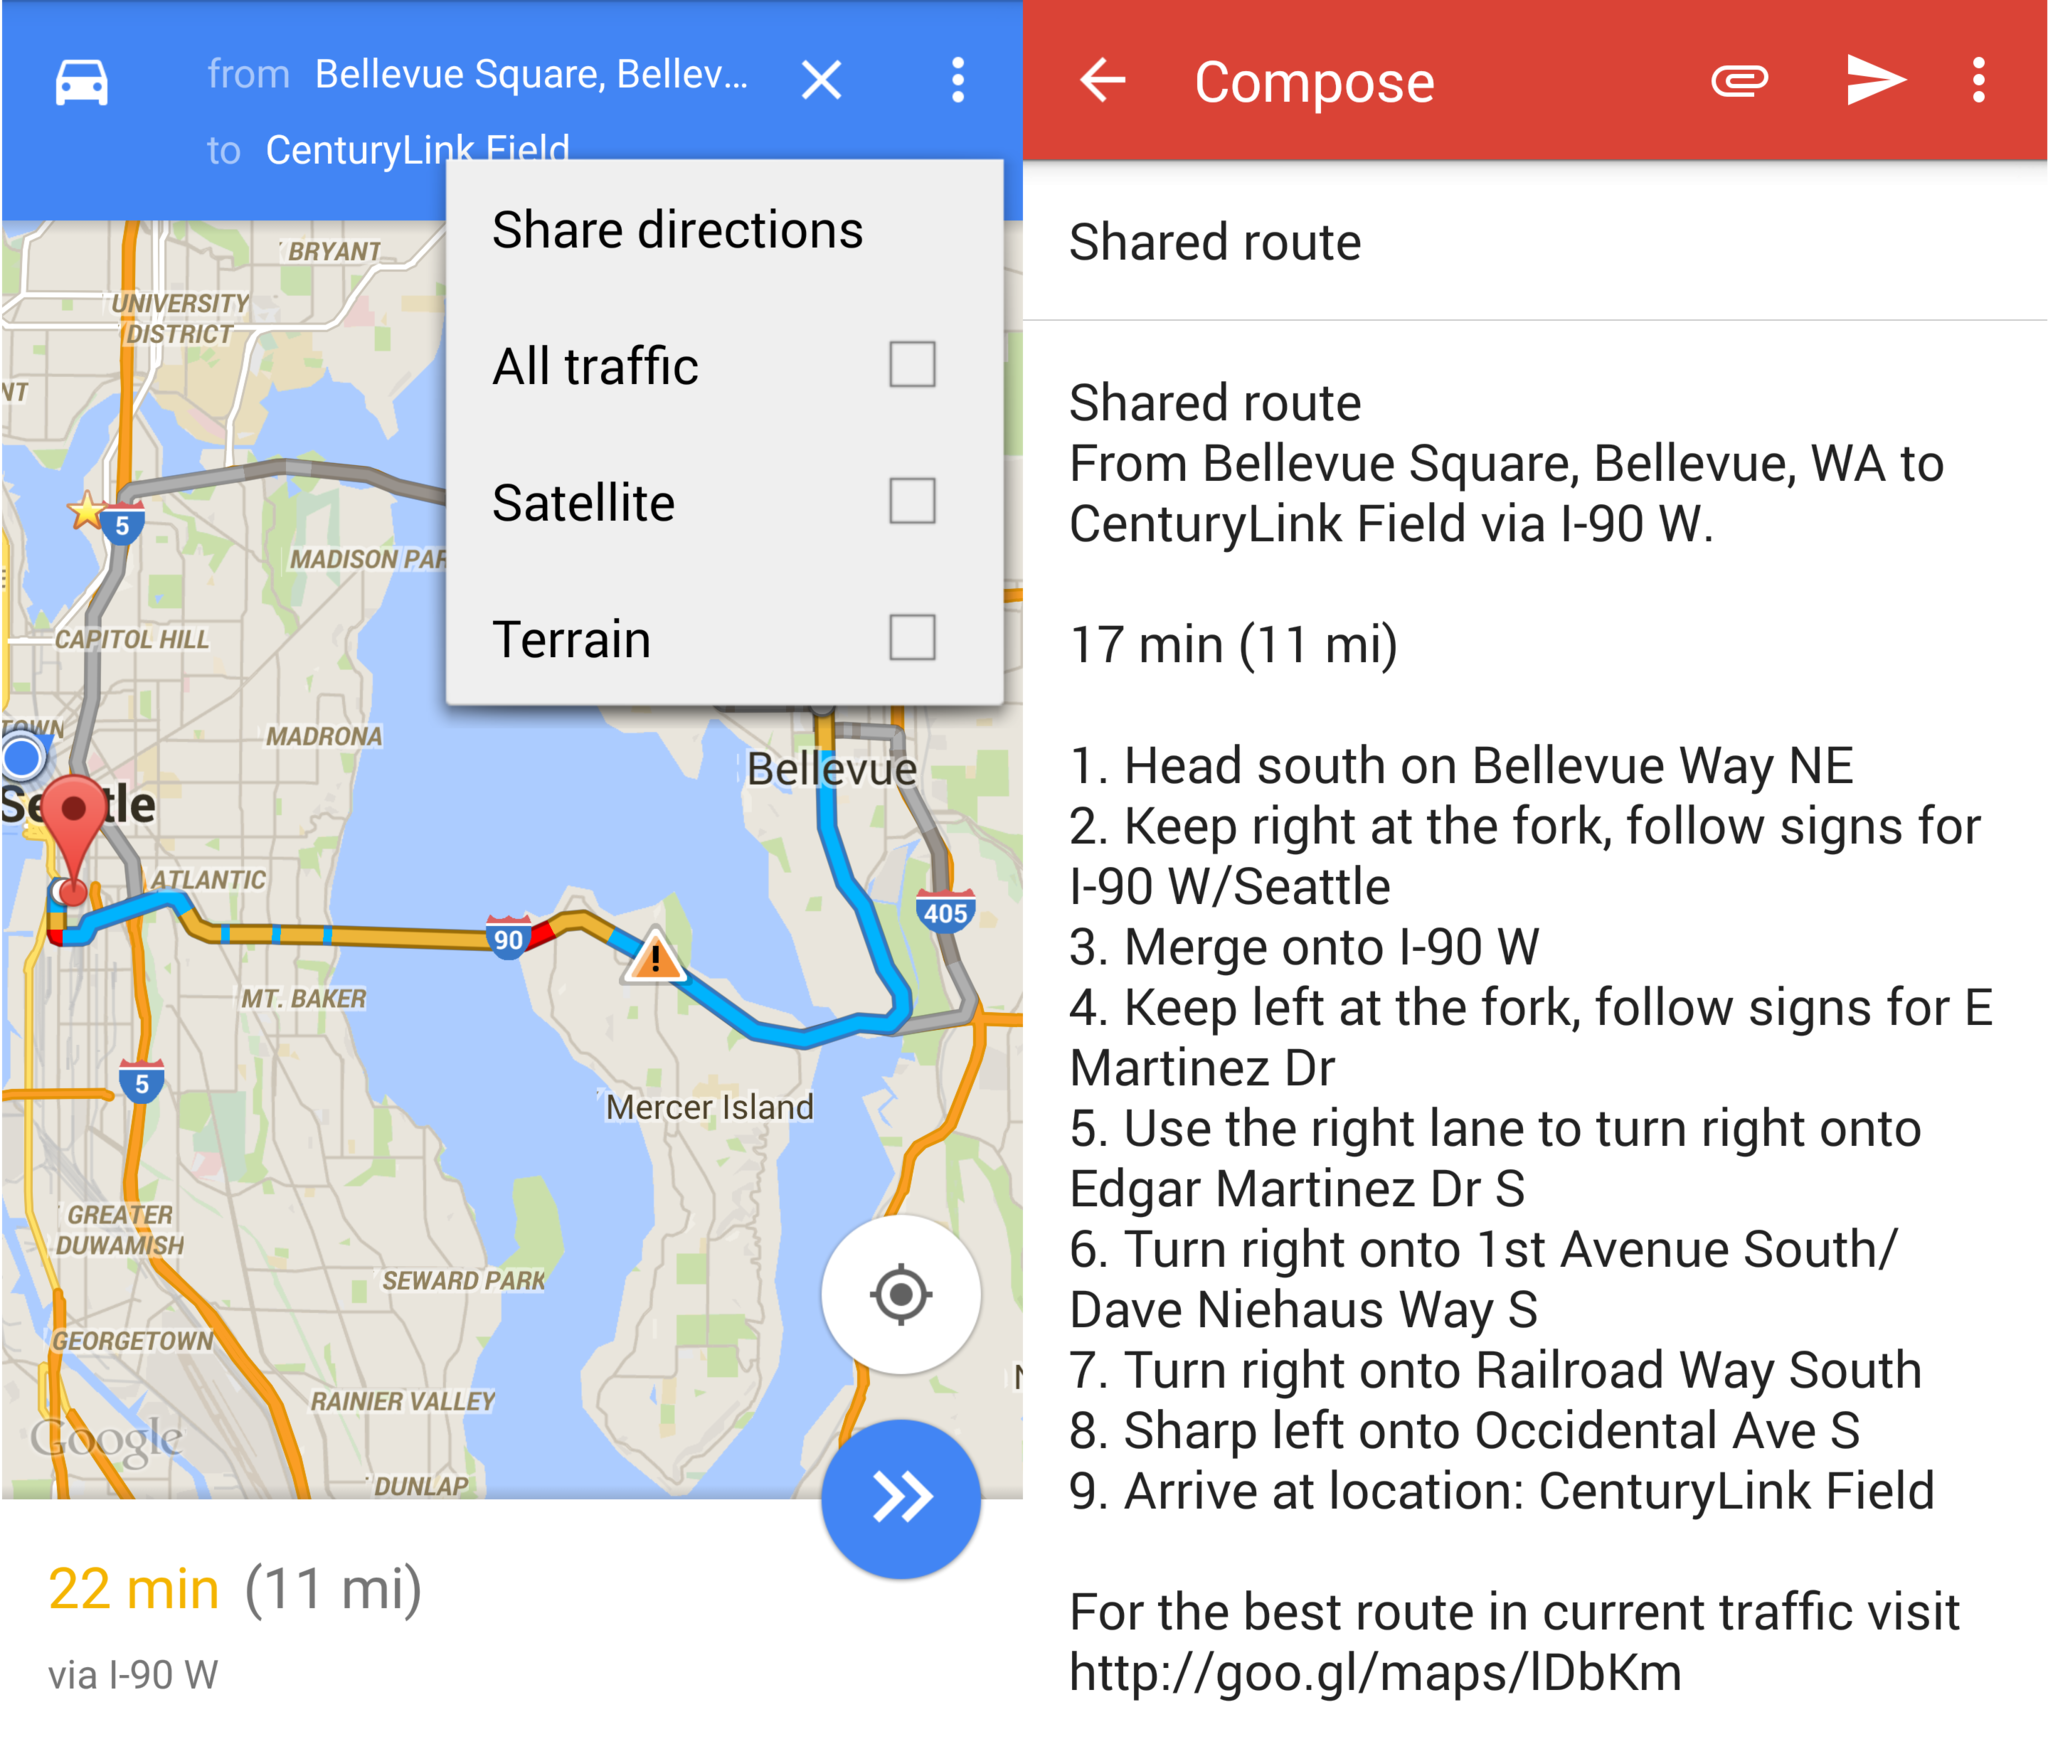 how to share directions in google maps